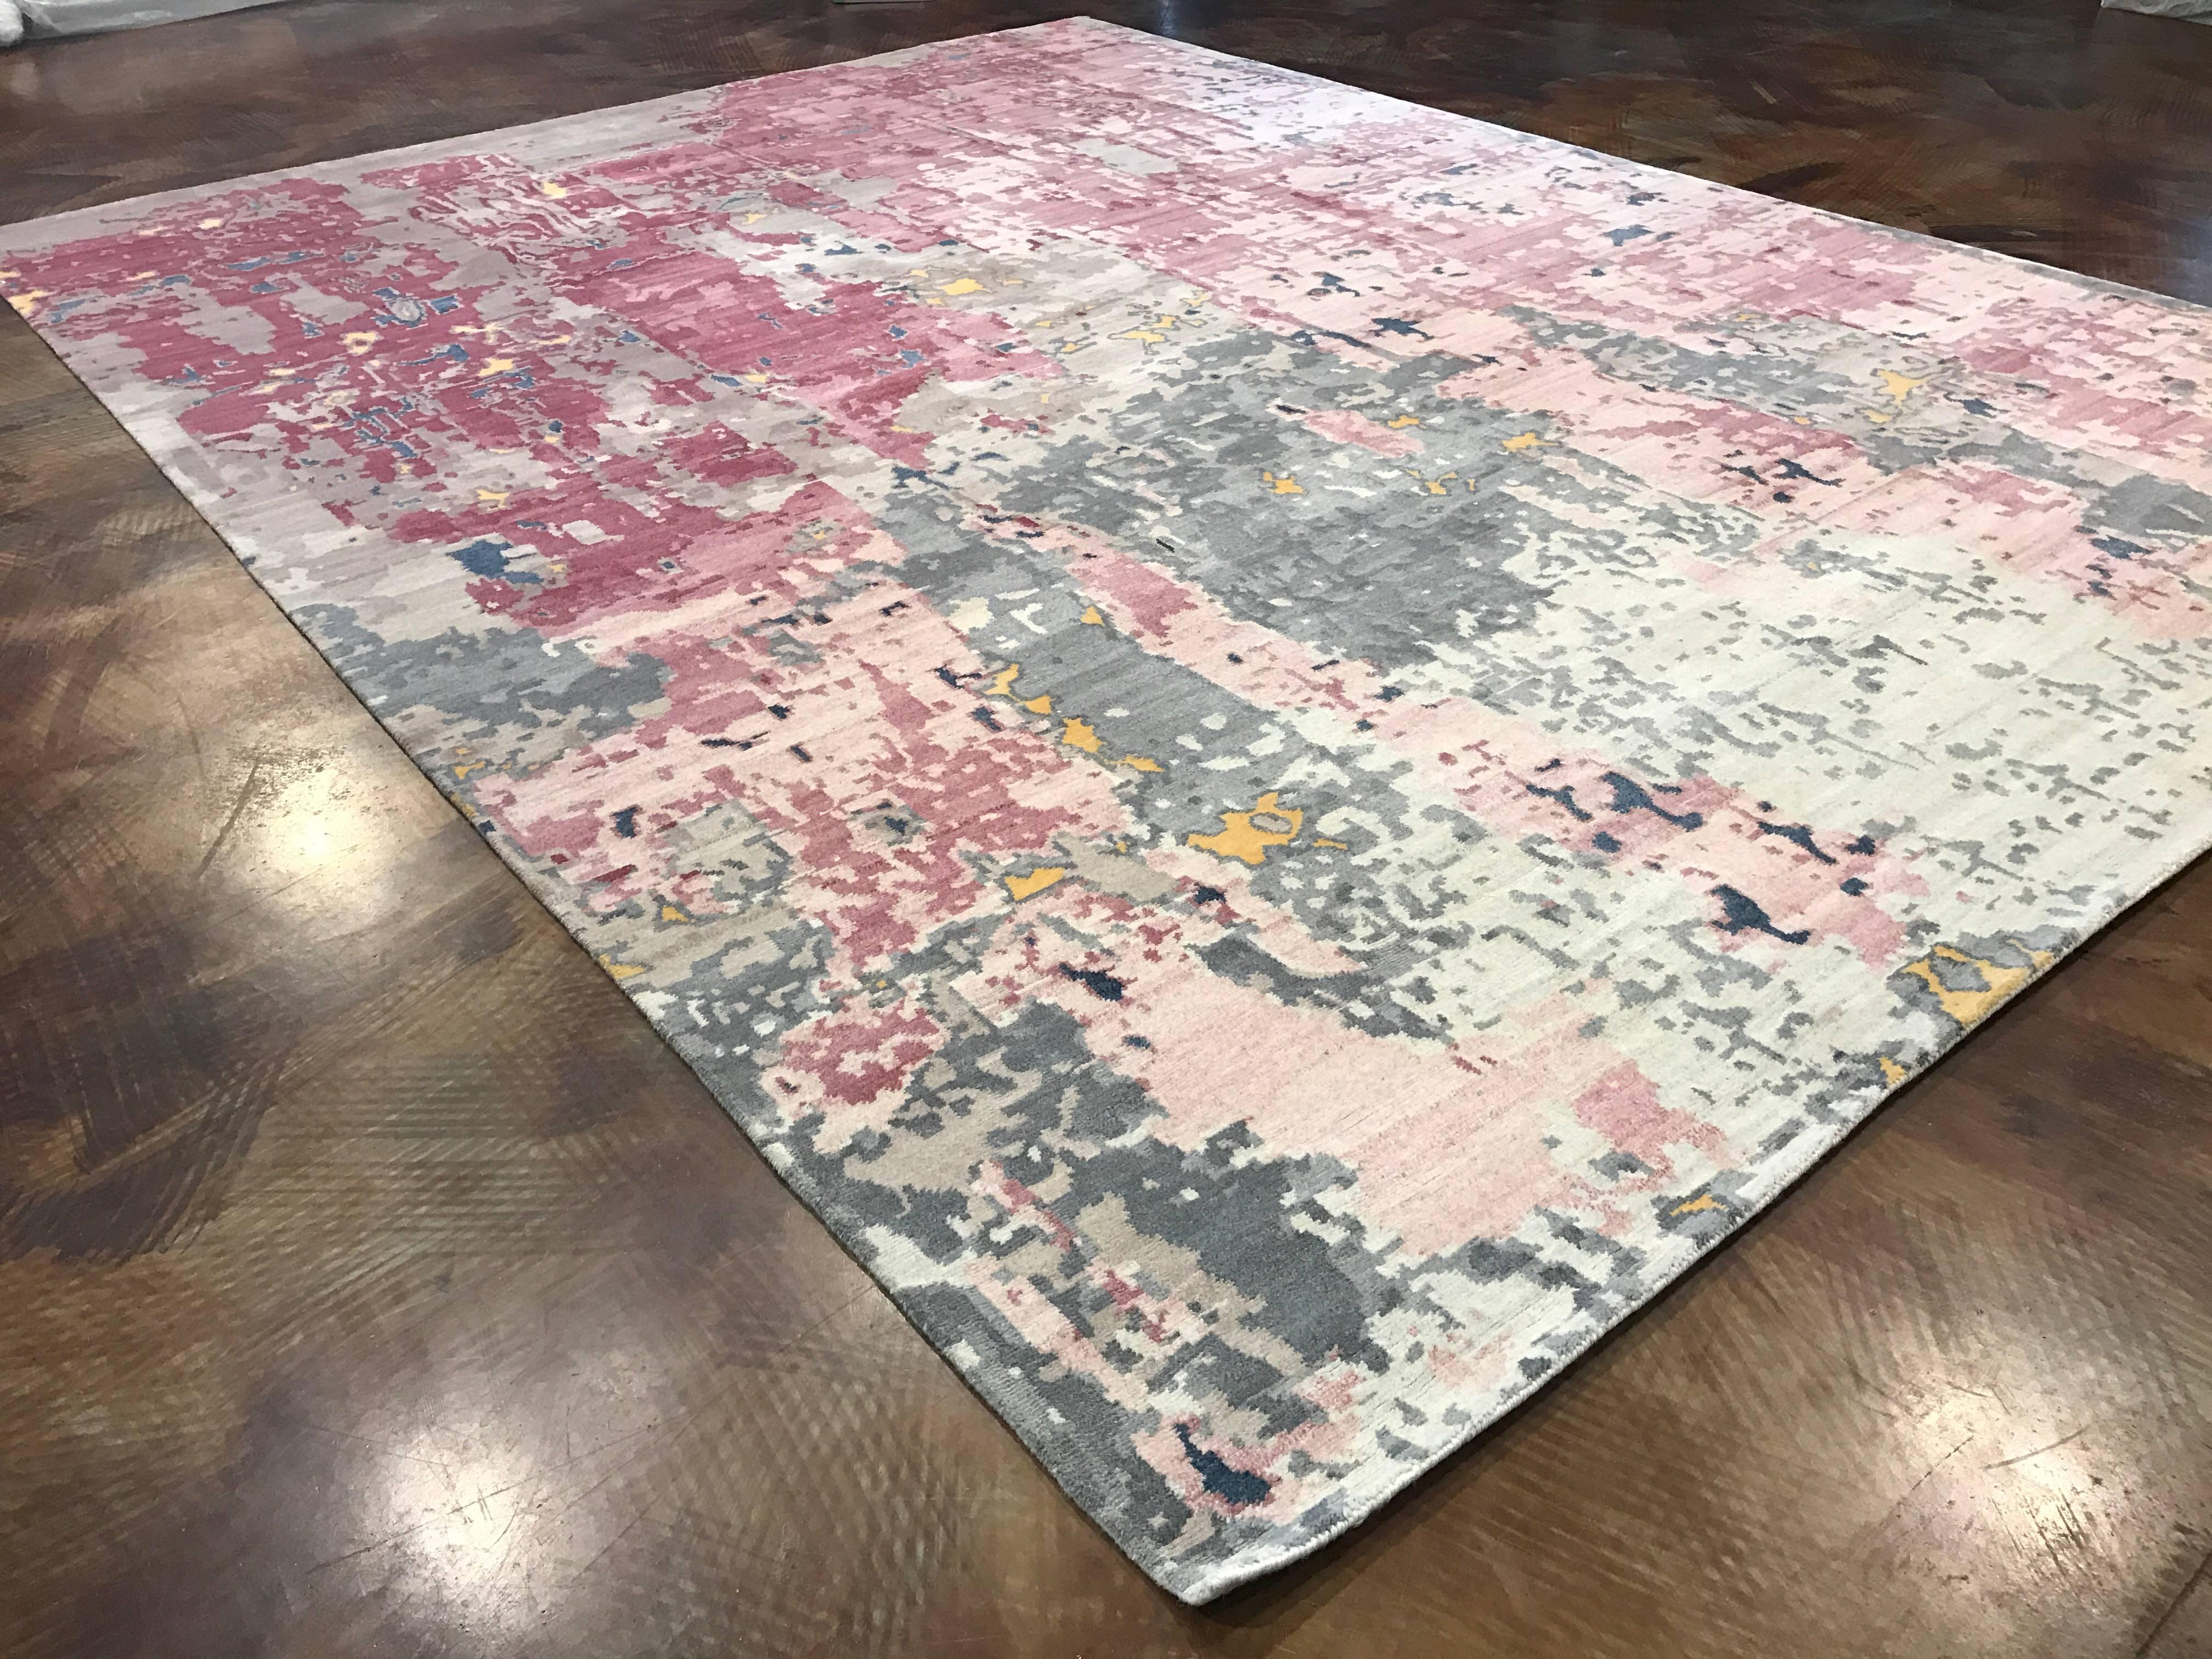 New Indo-Nepalese hand-knotted 100% wool rug. Made by our own weavers in India exclusively commissioned by Ashly rugs.
Size 9.2 x 12.2.